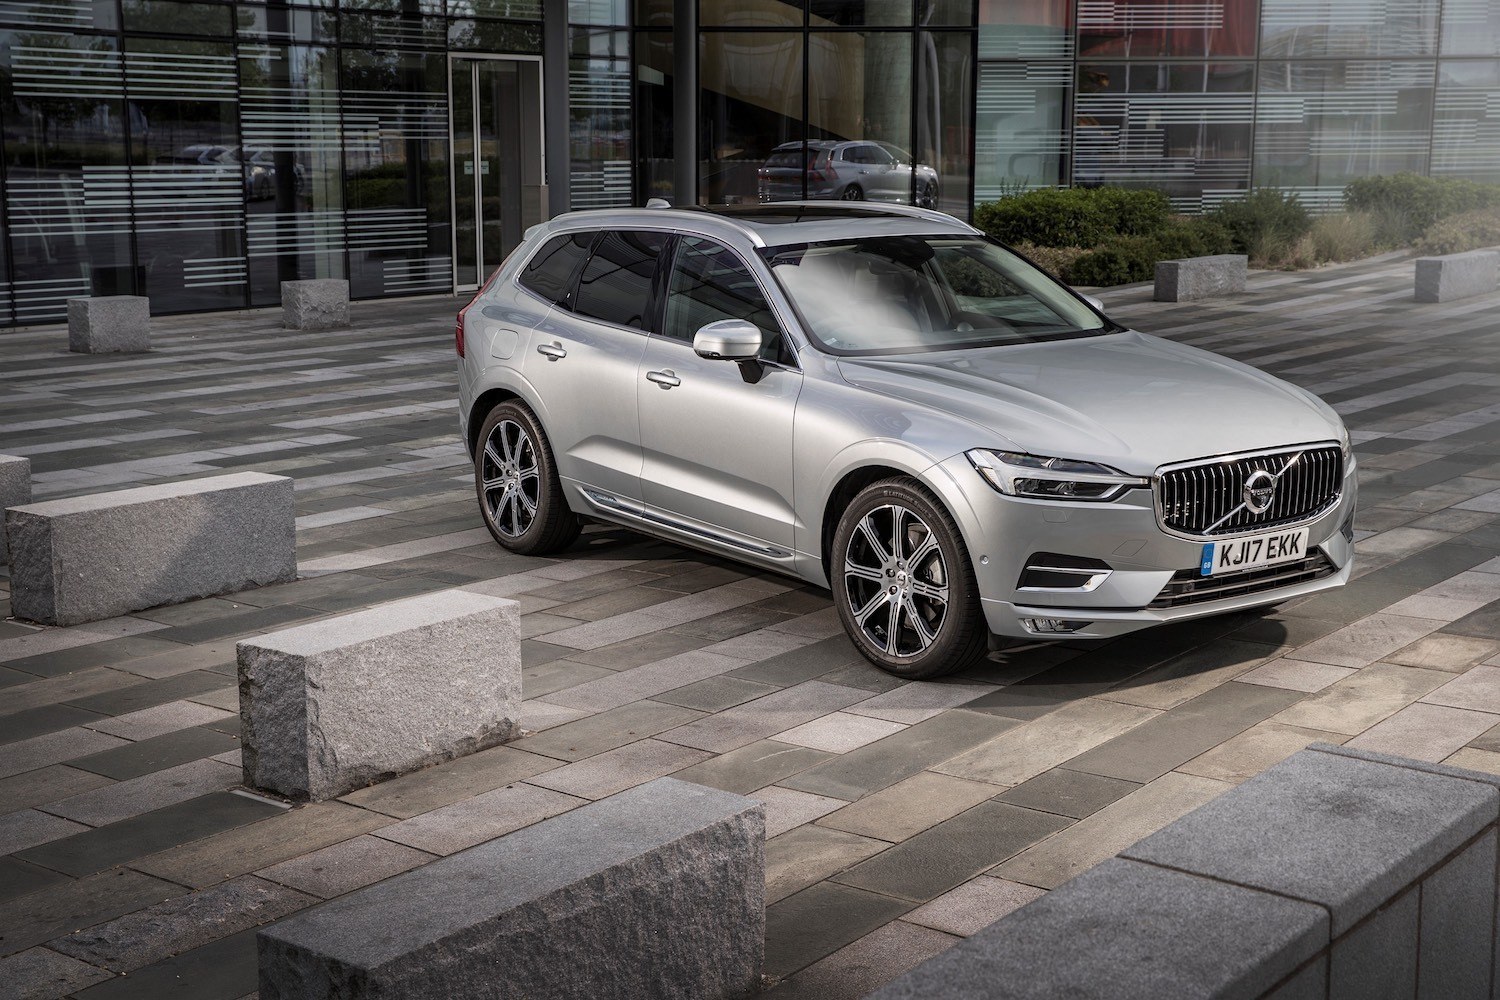 Neil Lyndon reviews the All New Volvo XC60 for Drive 23